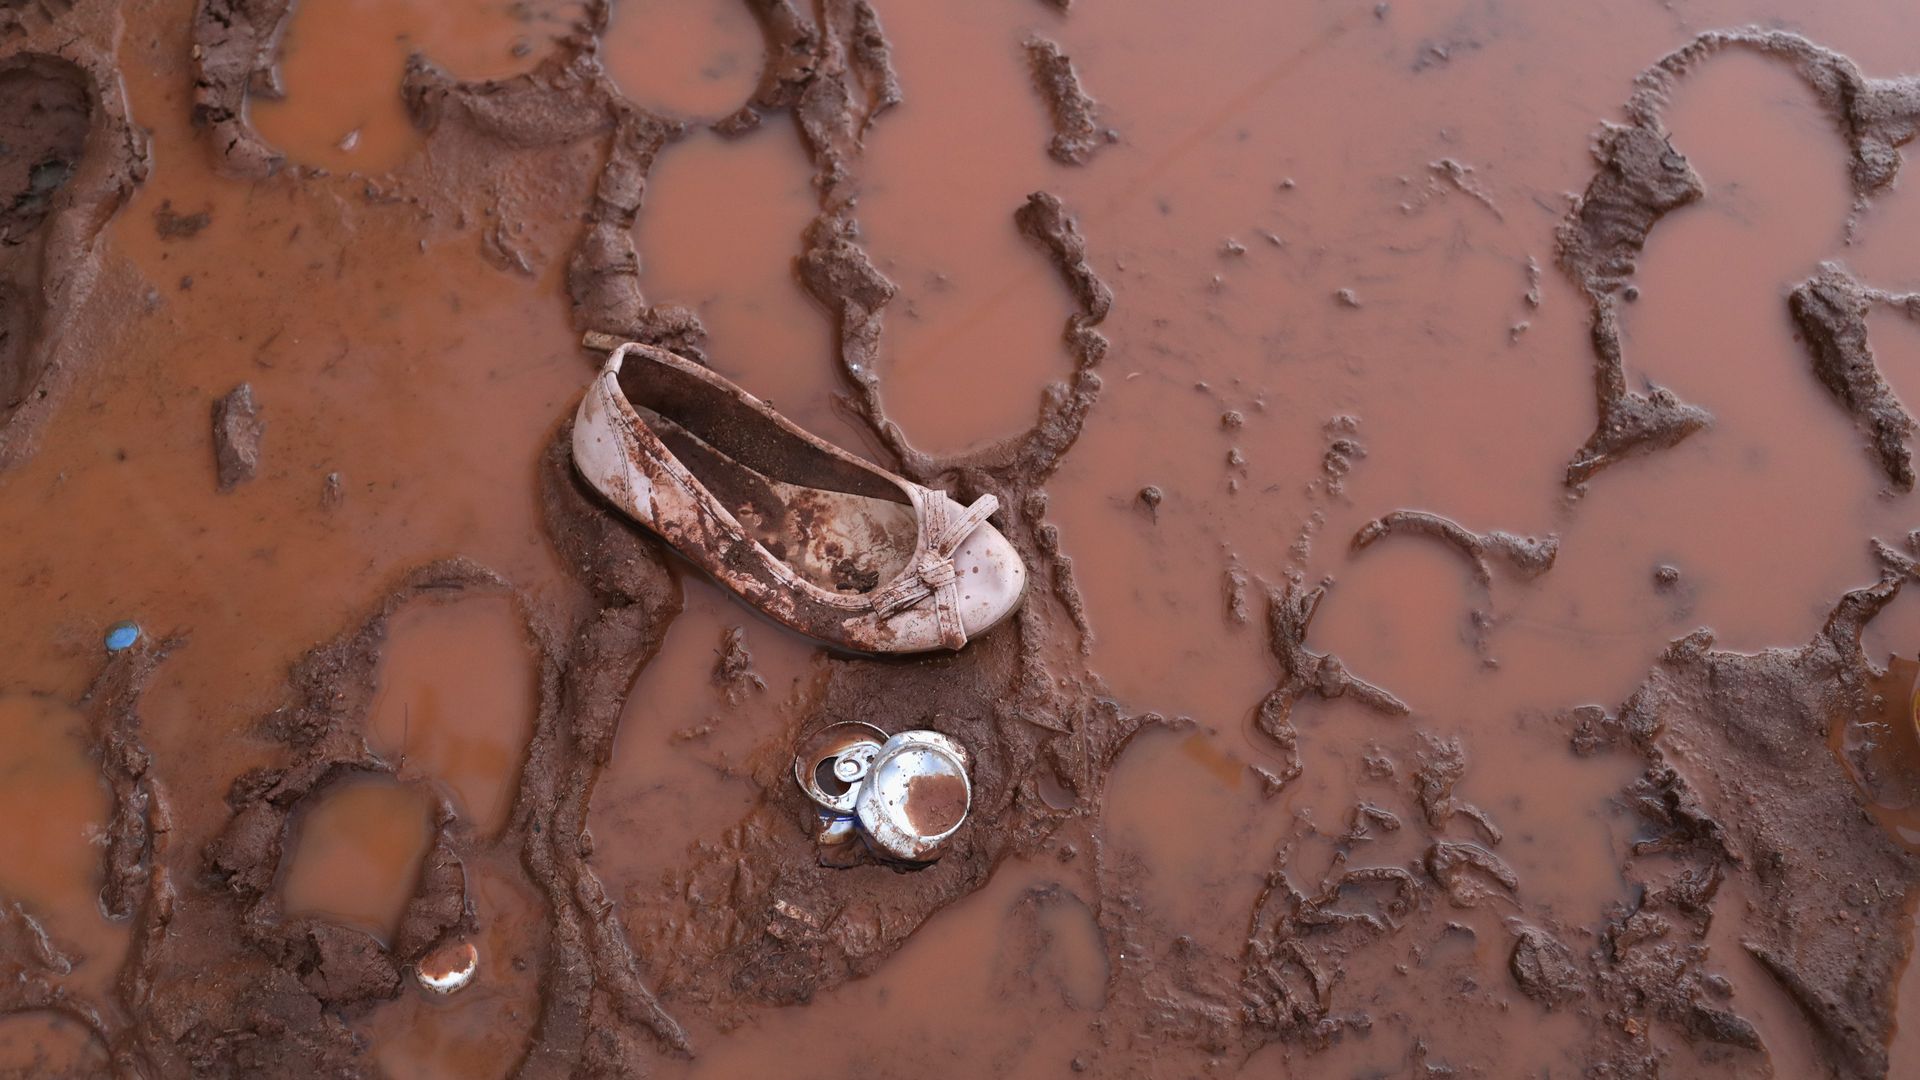 A woman's shoe in the mud.